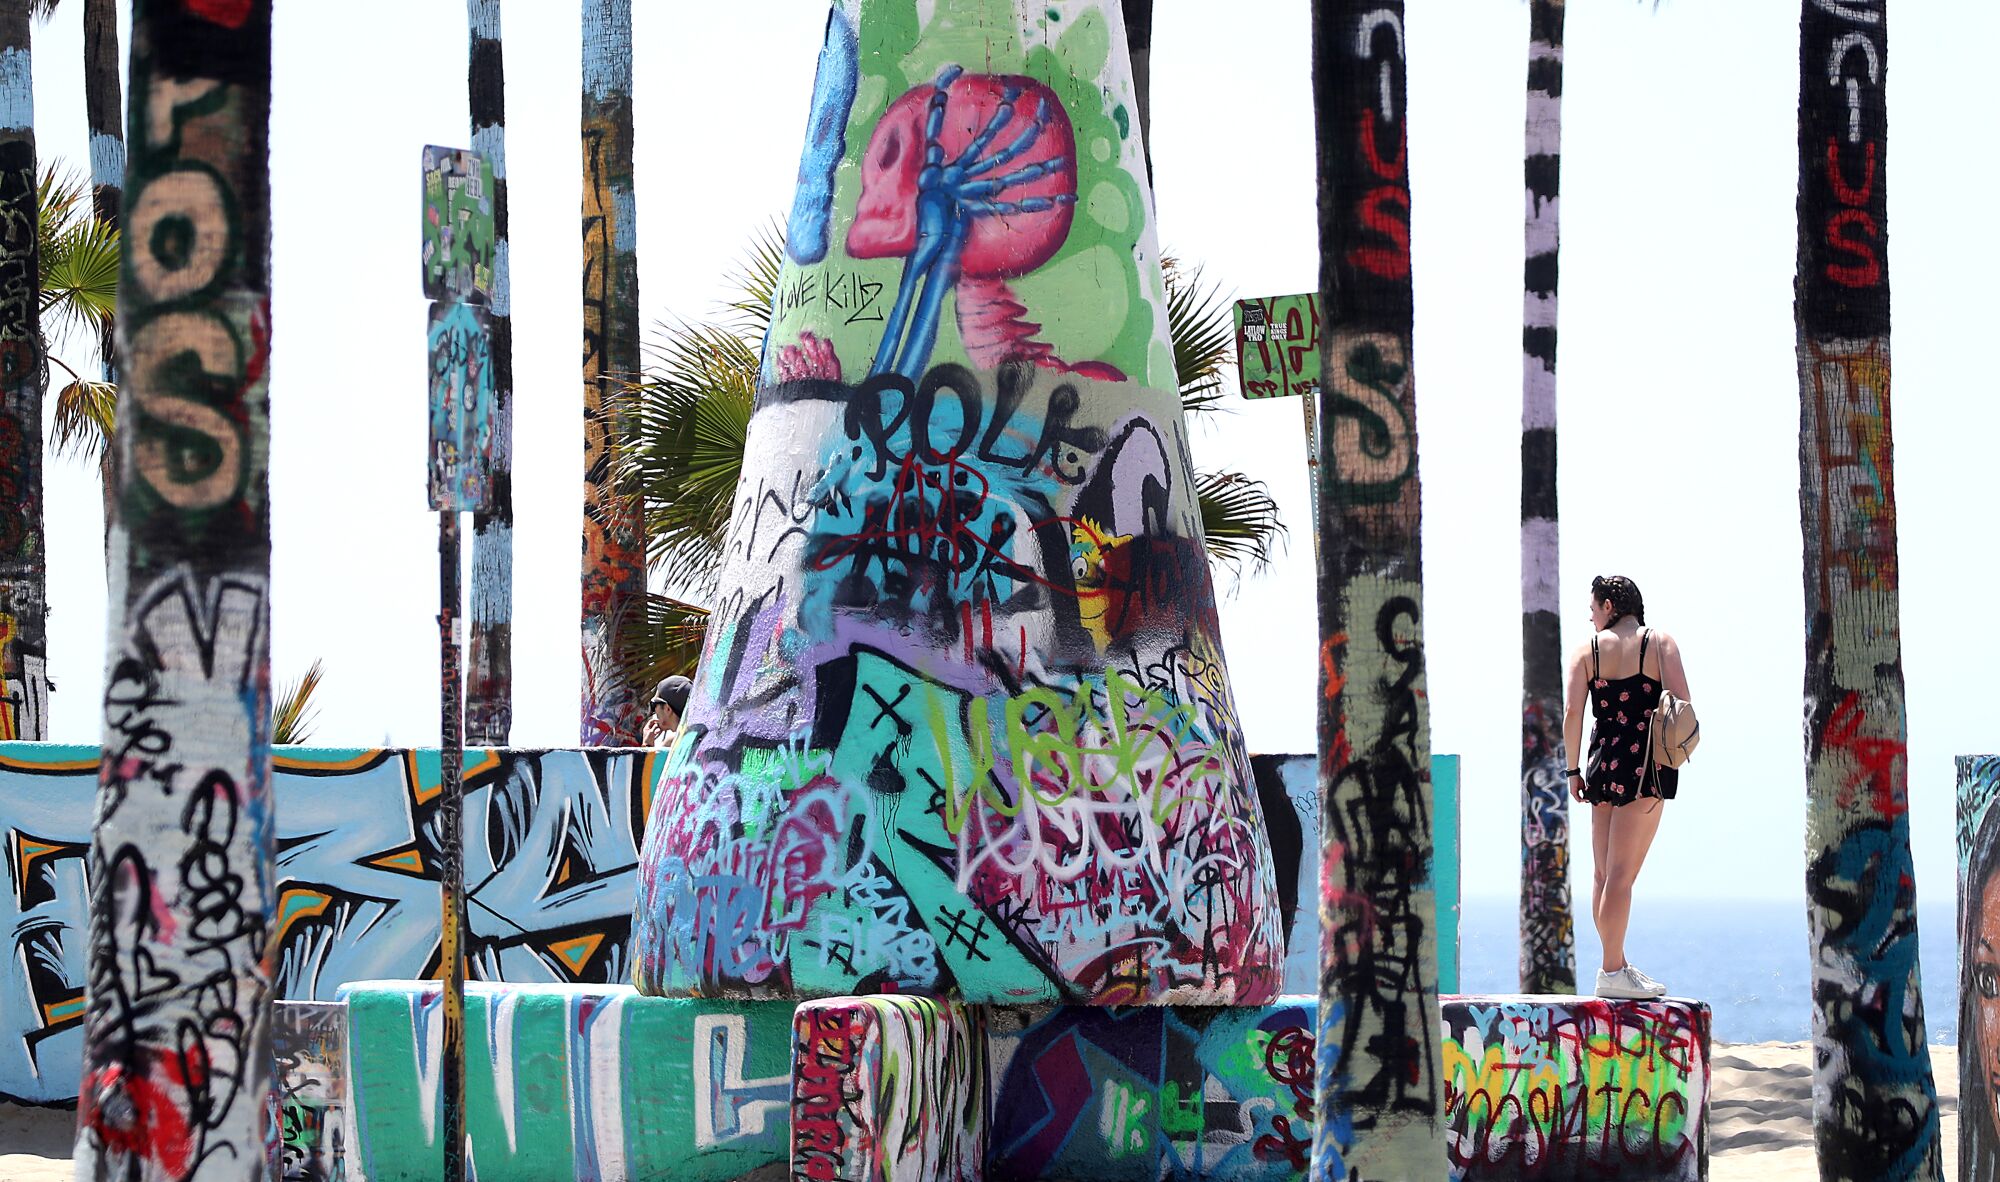 A beachgoer stands among graffiti on walls and trees at the beach